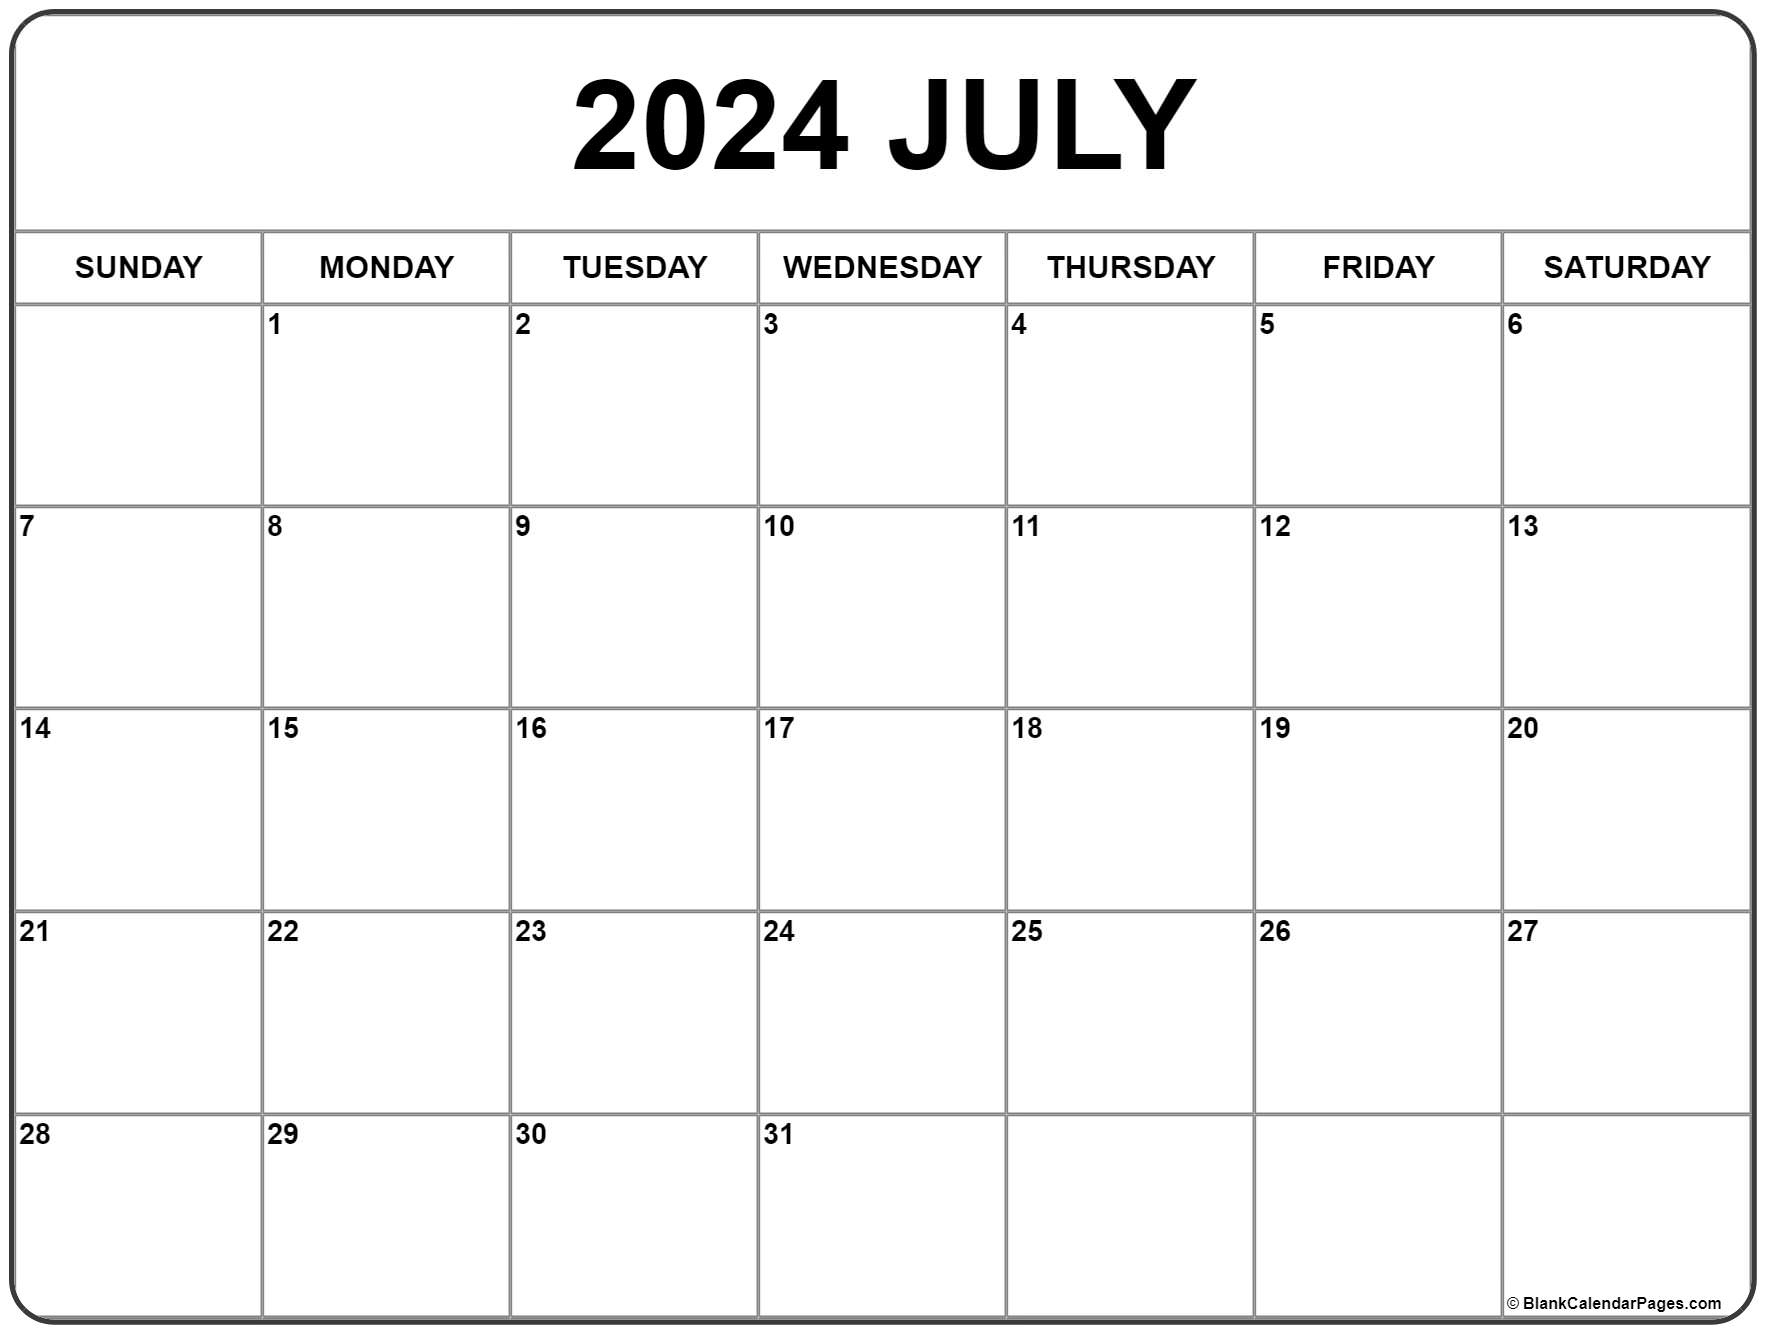 July 2024 Calendar | Free Printable Calendar | Show Me The Calendar Of The Month Of July 2024